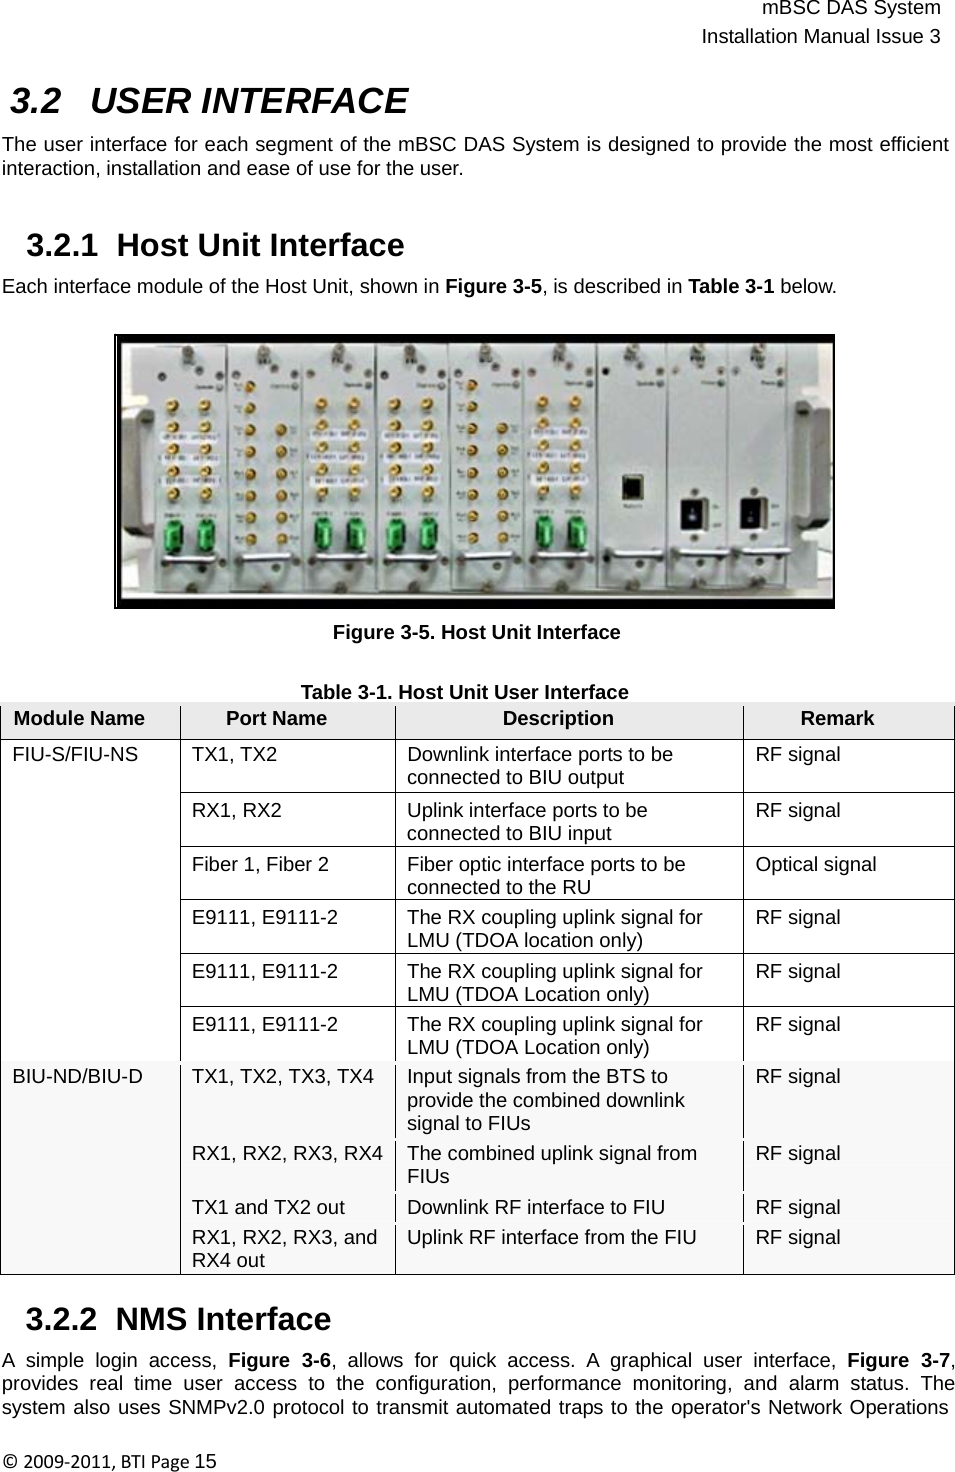 mBSC DAS SystemInstallation Manual Issue 3©2009‐2011,BTIPage15   Module Name Port Name Description Remark TX1, TX2 Downlink interface ports to be connected to BIU output RF signal RX1, RX2 Uplink interface ports to be connected to BIU input RF signal Fiber 1, Fiber 2 Fiber optic interface ports to be connected to the RU Optical signal E9111, E9111-2 The RX coupling uplink signal for LMU (TDOA location only) RF signal E9111, E9111-2 The RX coupling uplink signal for LMU (TDOA Location only) RF signal FIU-S/FIU-NS E9111, E9111-2 The RX coupling uplink signal for LMU (TDOA Location only) RF signal TX1, TX2, TX3, TX4 Input signals from the BTS to provide the combined downlink signal to FIUs RF signal RX1, RX2, RX3, RX4 The combined uplink signal from FIUs RF signal TX1 and TX2 out Downlink RF interface to FIU RF signal BIU-ND/BIU-D RX1, RX2, RX3, andRX4 out Uplink RF interface from the FIU RF signal 3.2 USER INTERFACE  The user interface for each segment of the mBSC DAS System is designed to provide the most efficient interaction, installation and ease of use for the user.   3.2.1  Host Unit Interface  Each interface module of the Host Unit, shown in Figure 3-5, is described in Table 3-1 below.                 Figure 3-5. Host Unit Interface   Table 3-1. Host Unit User Interface                               3.2.2  NMS Interface  A simple login access, Figure 3-6, allows for quick access. A graphical user interface, Figure 3-7, provides real time user access to the configuration, performance monitoring, and alarm status. The system also uses SNMPv2.0 protocol to transmit automated traps to the operator&apos;s Network Operations 